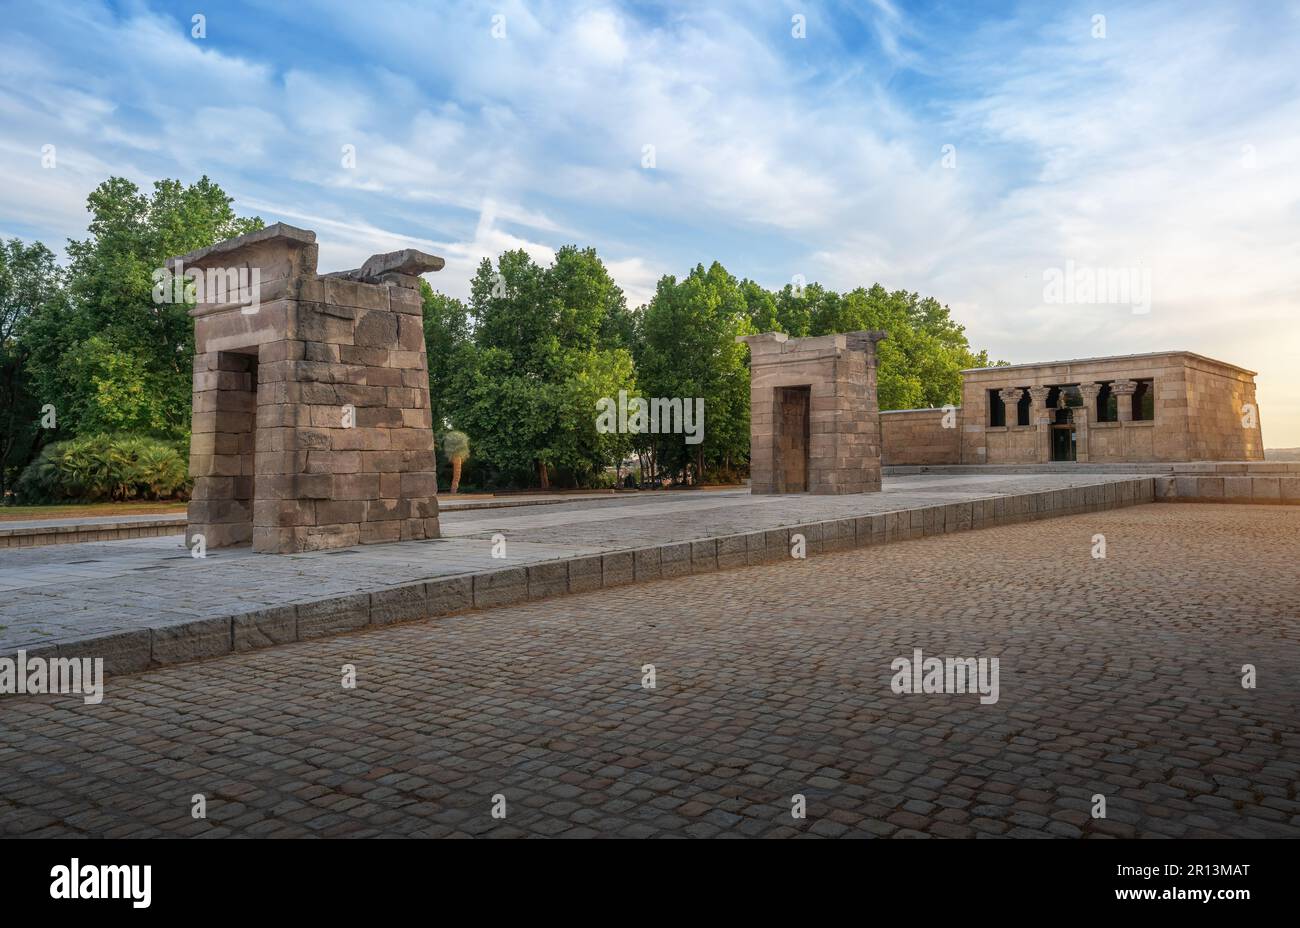 Temple of Debod - ancient Egyptian temple at La Montana Park - Madrid, Spain Stock Photo